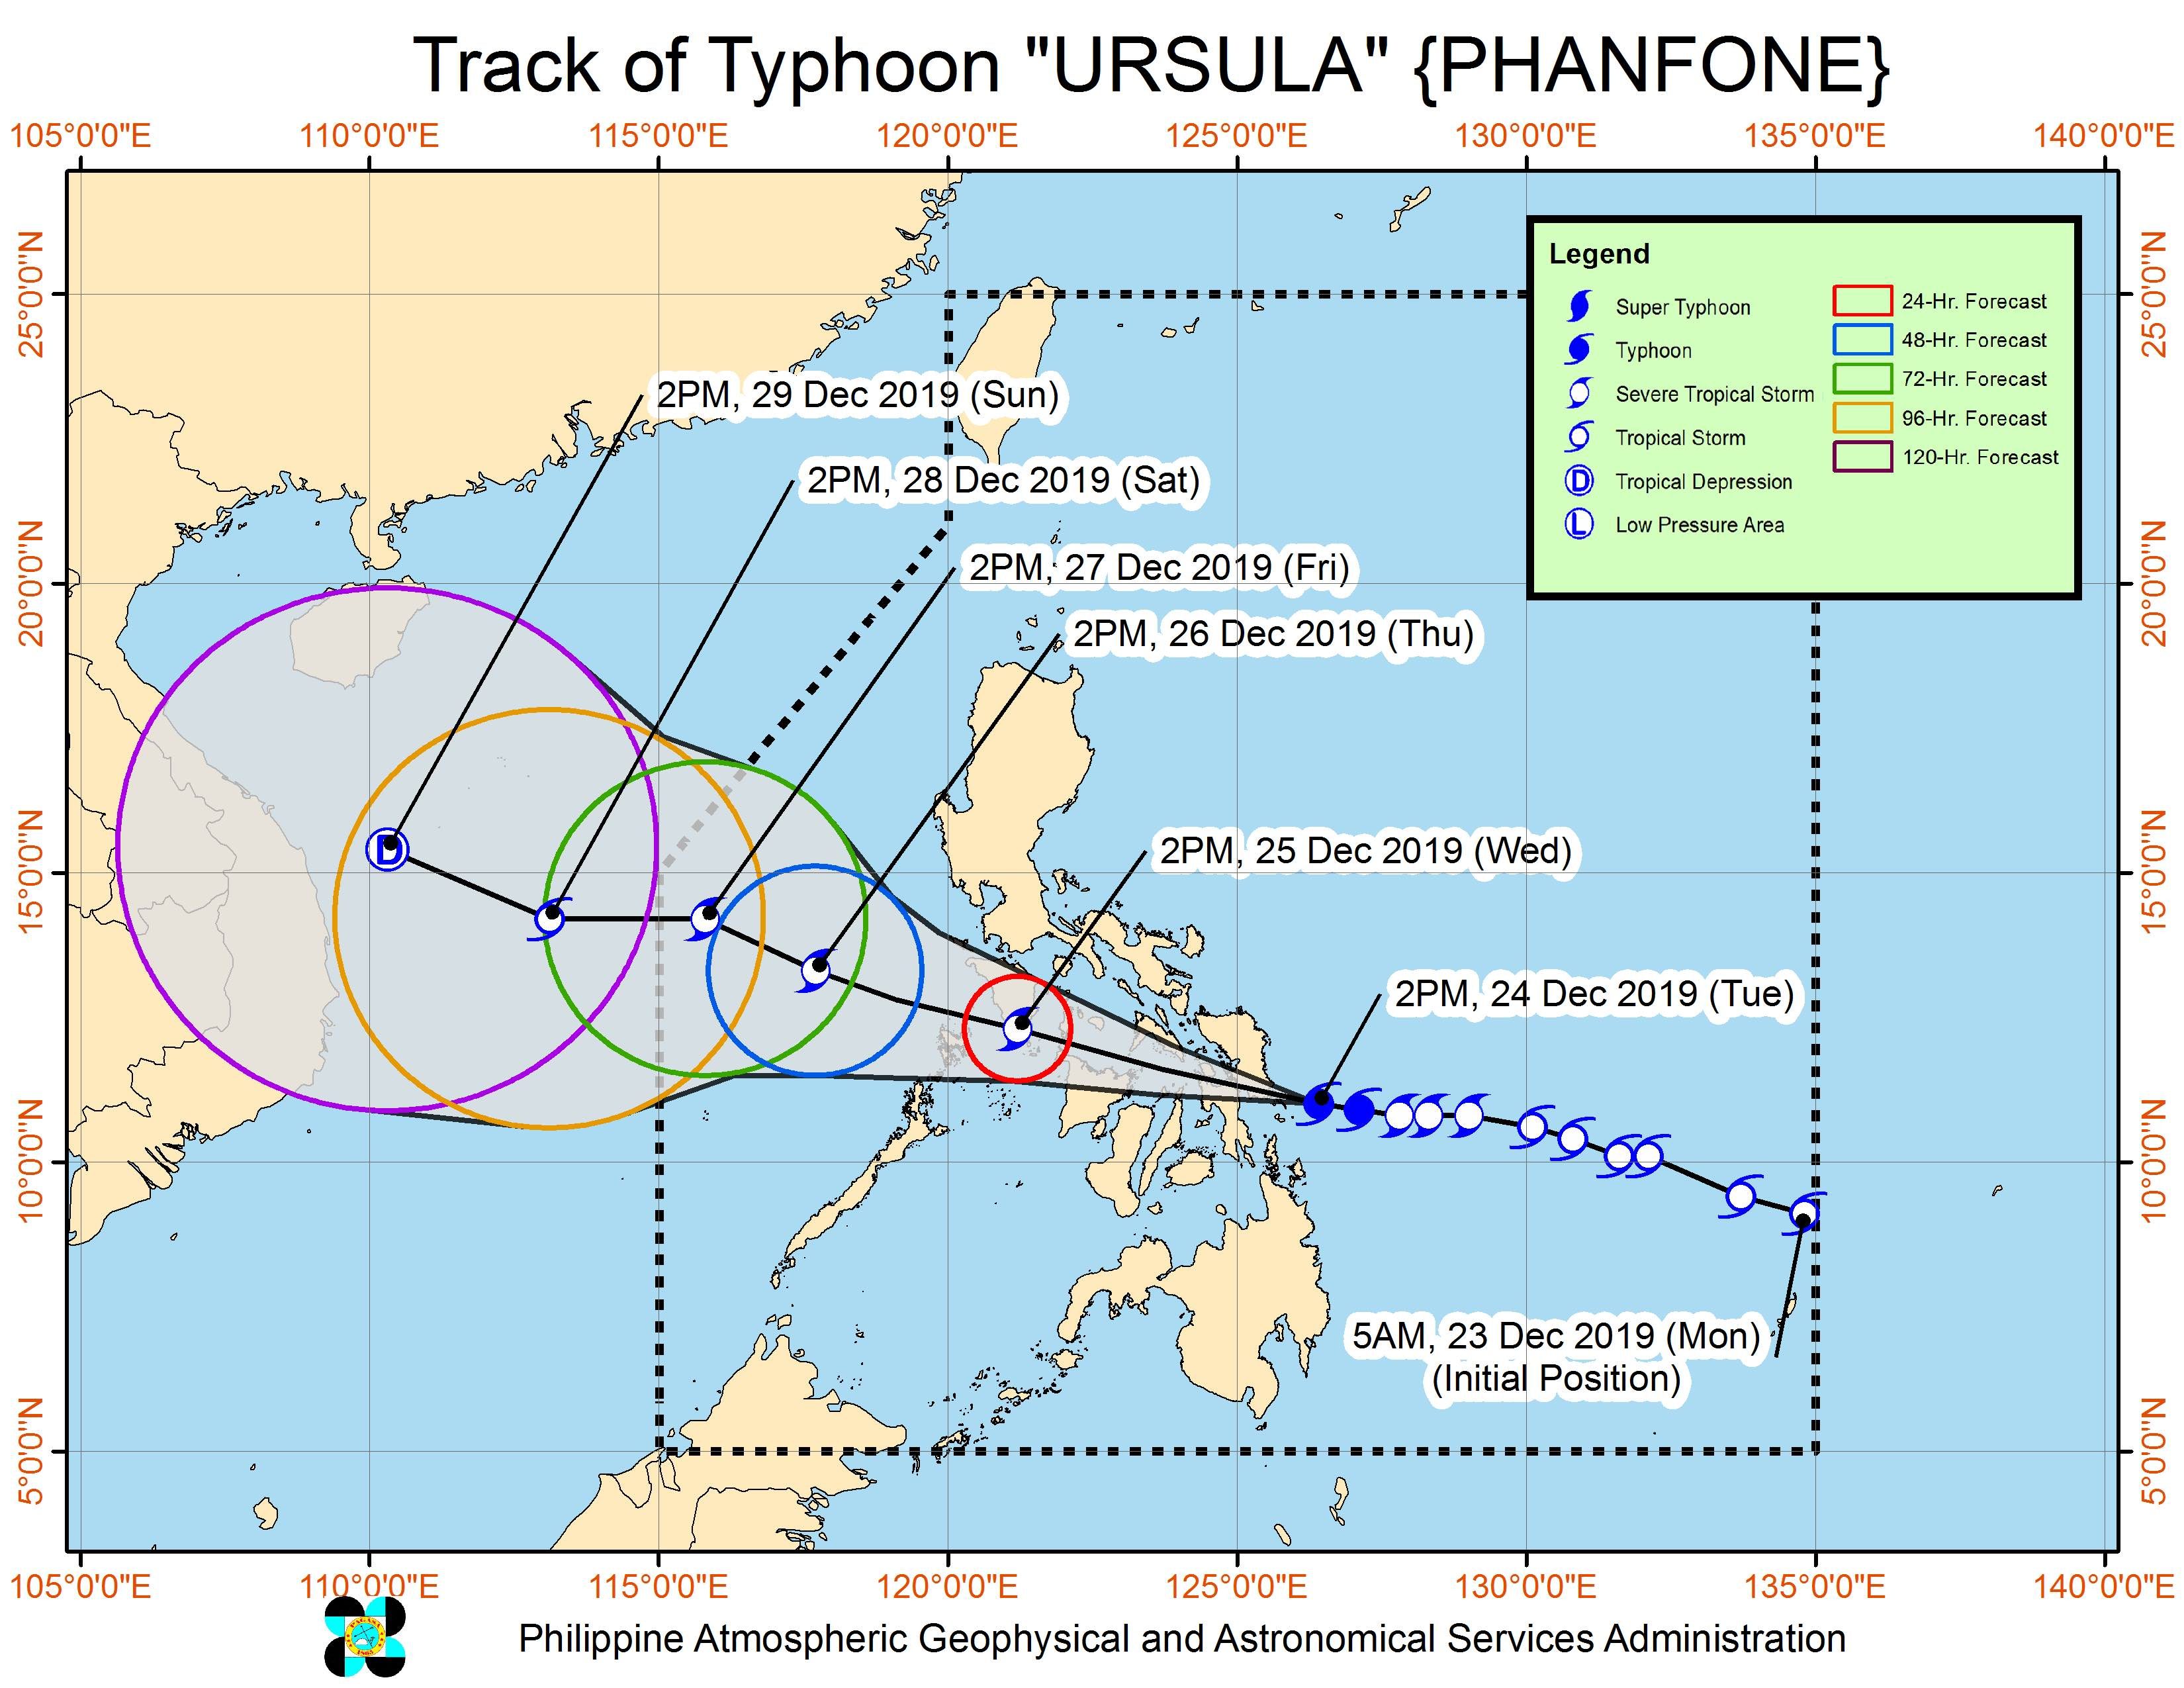 Forecast track of Typhoon Ursula (Phanfone) as of December 24, 2019, 5 pm. Image from PAGASA 